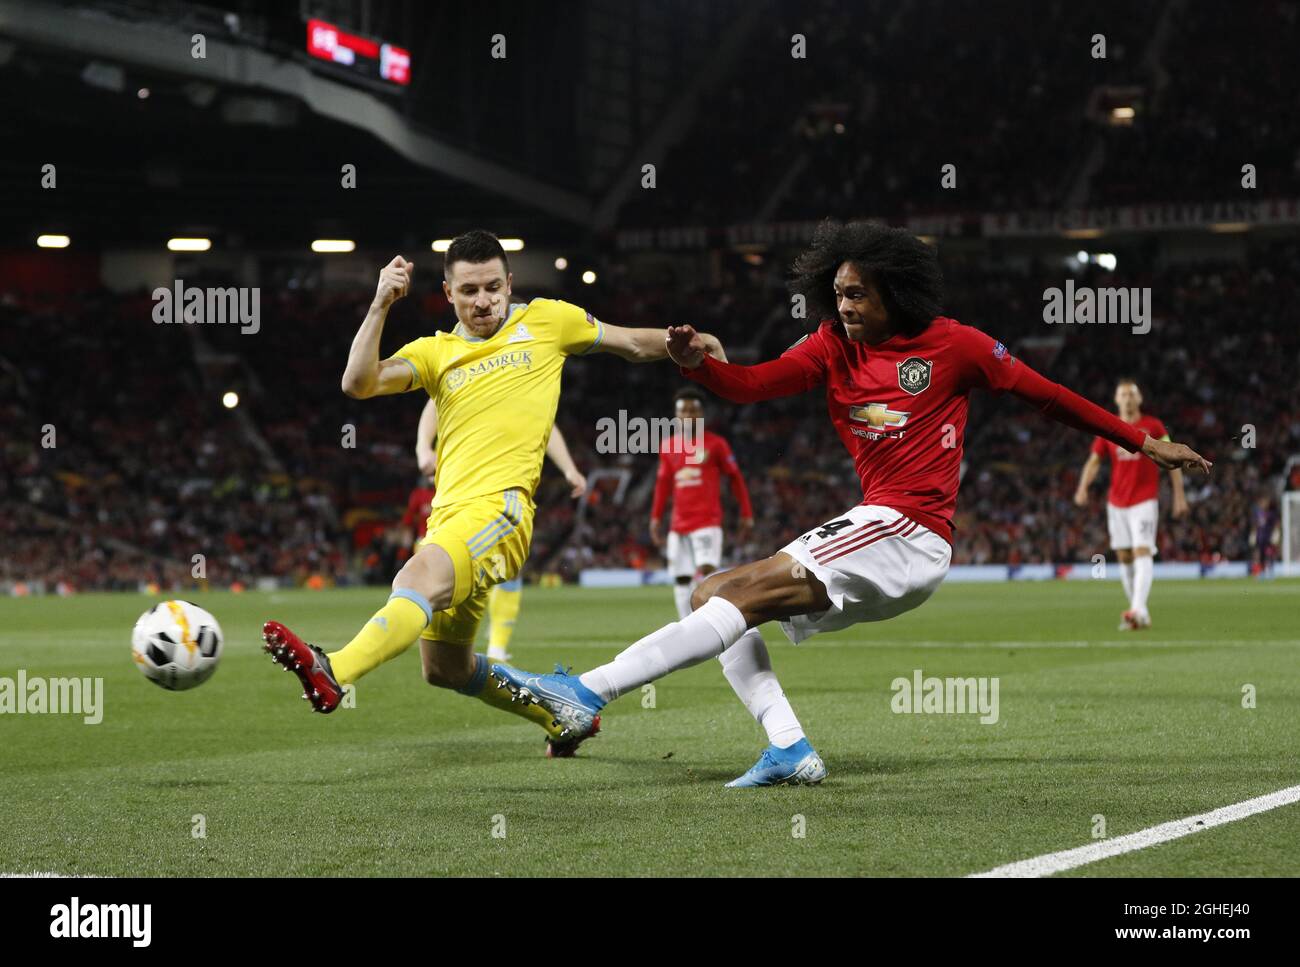 Tahith Chong of Manchester United crosses the ball past Antonio Rukavina of FC Astanaduring the UEFA Europa League match at Old Trafford, Manchester. Picture date: 19th September 2019. Picture credit should read: Darren Staples/Sportimage via PA Images Stock Photo